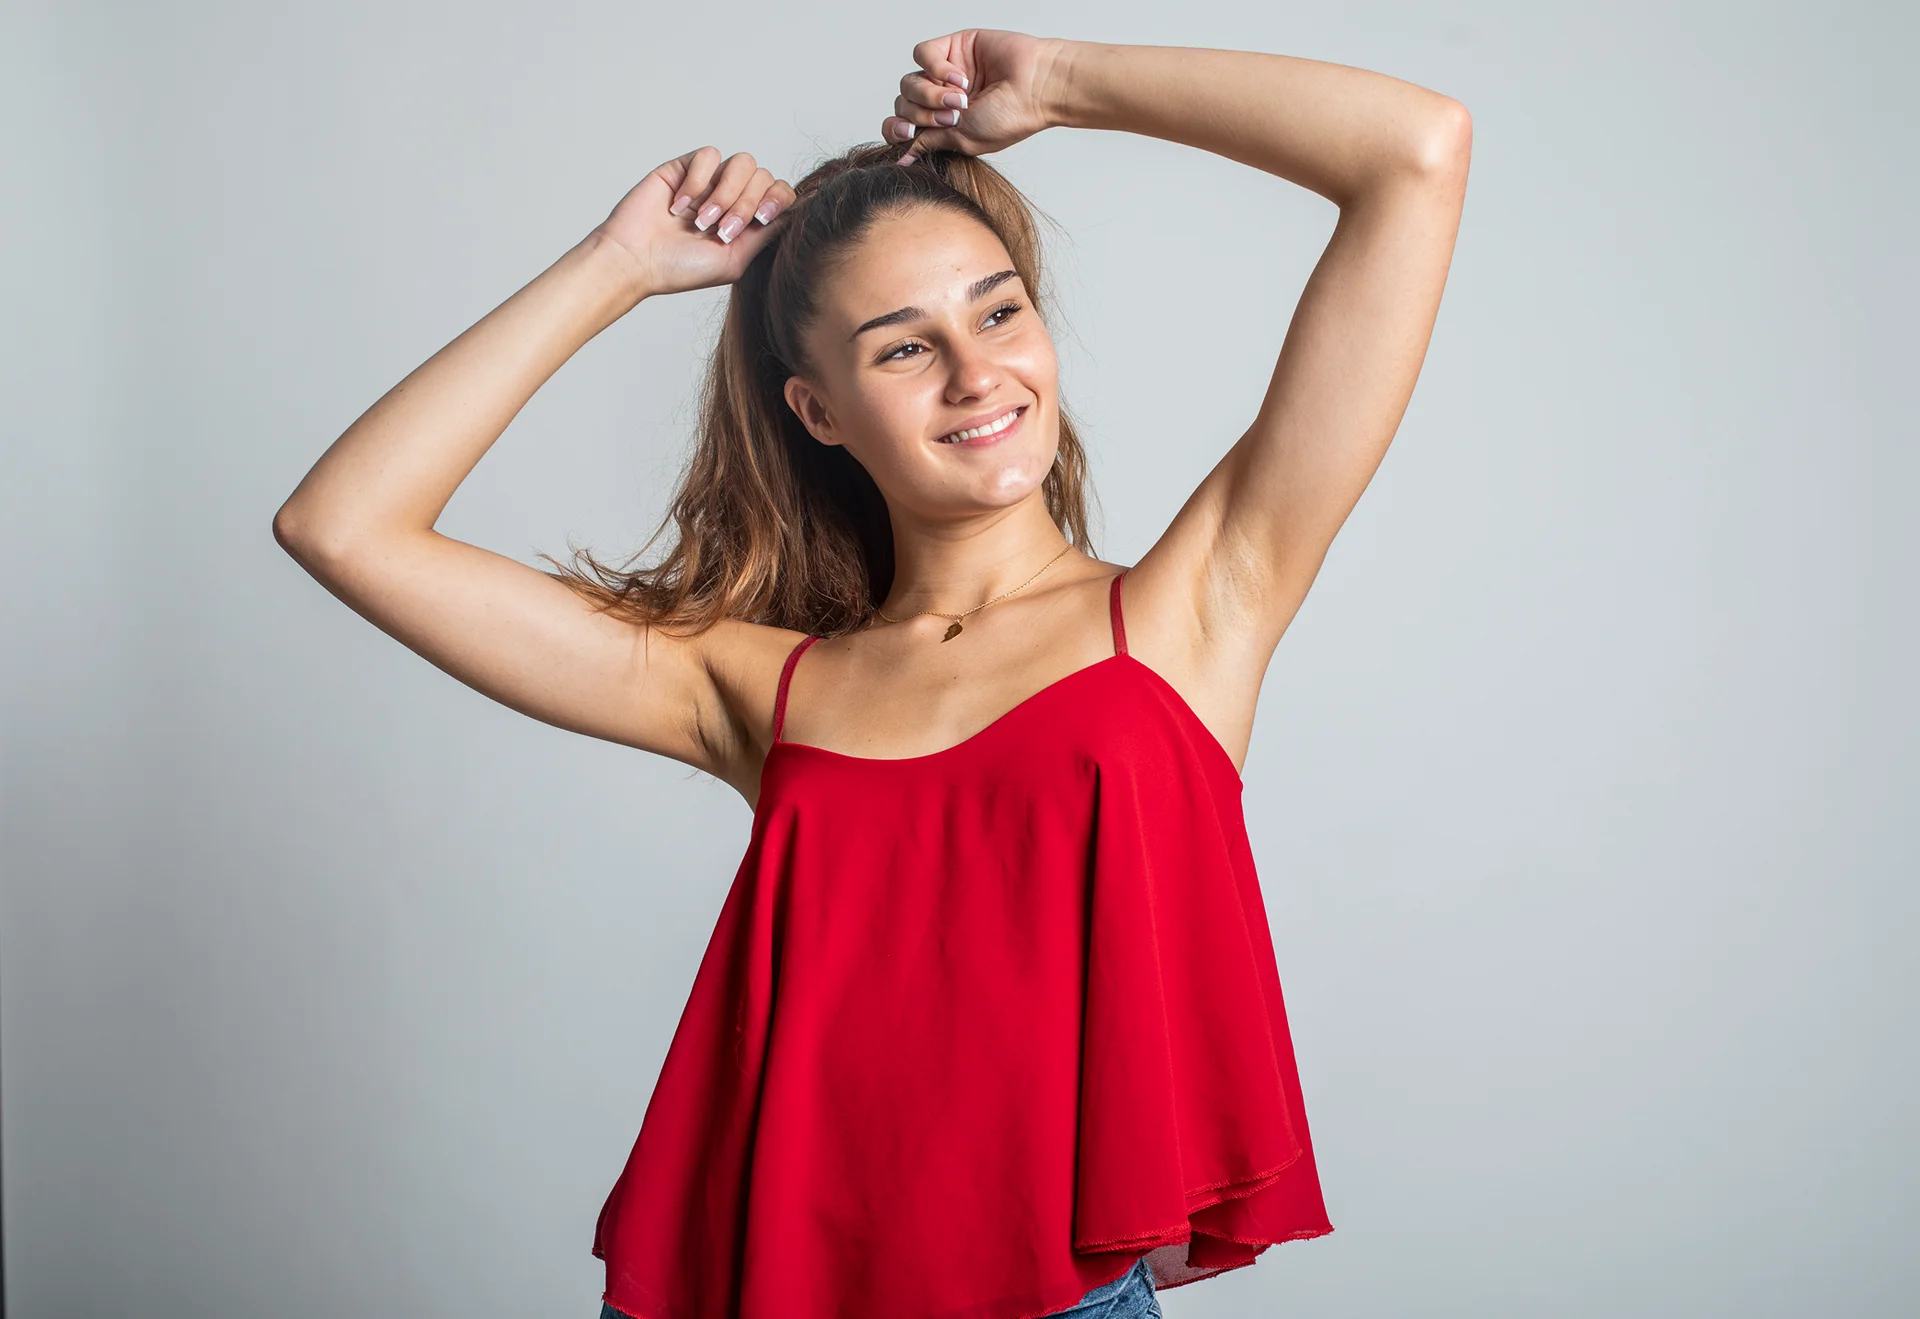 A young woman in a red top showcasing her sleek arms after arm lipo procedure.